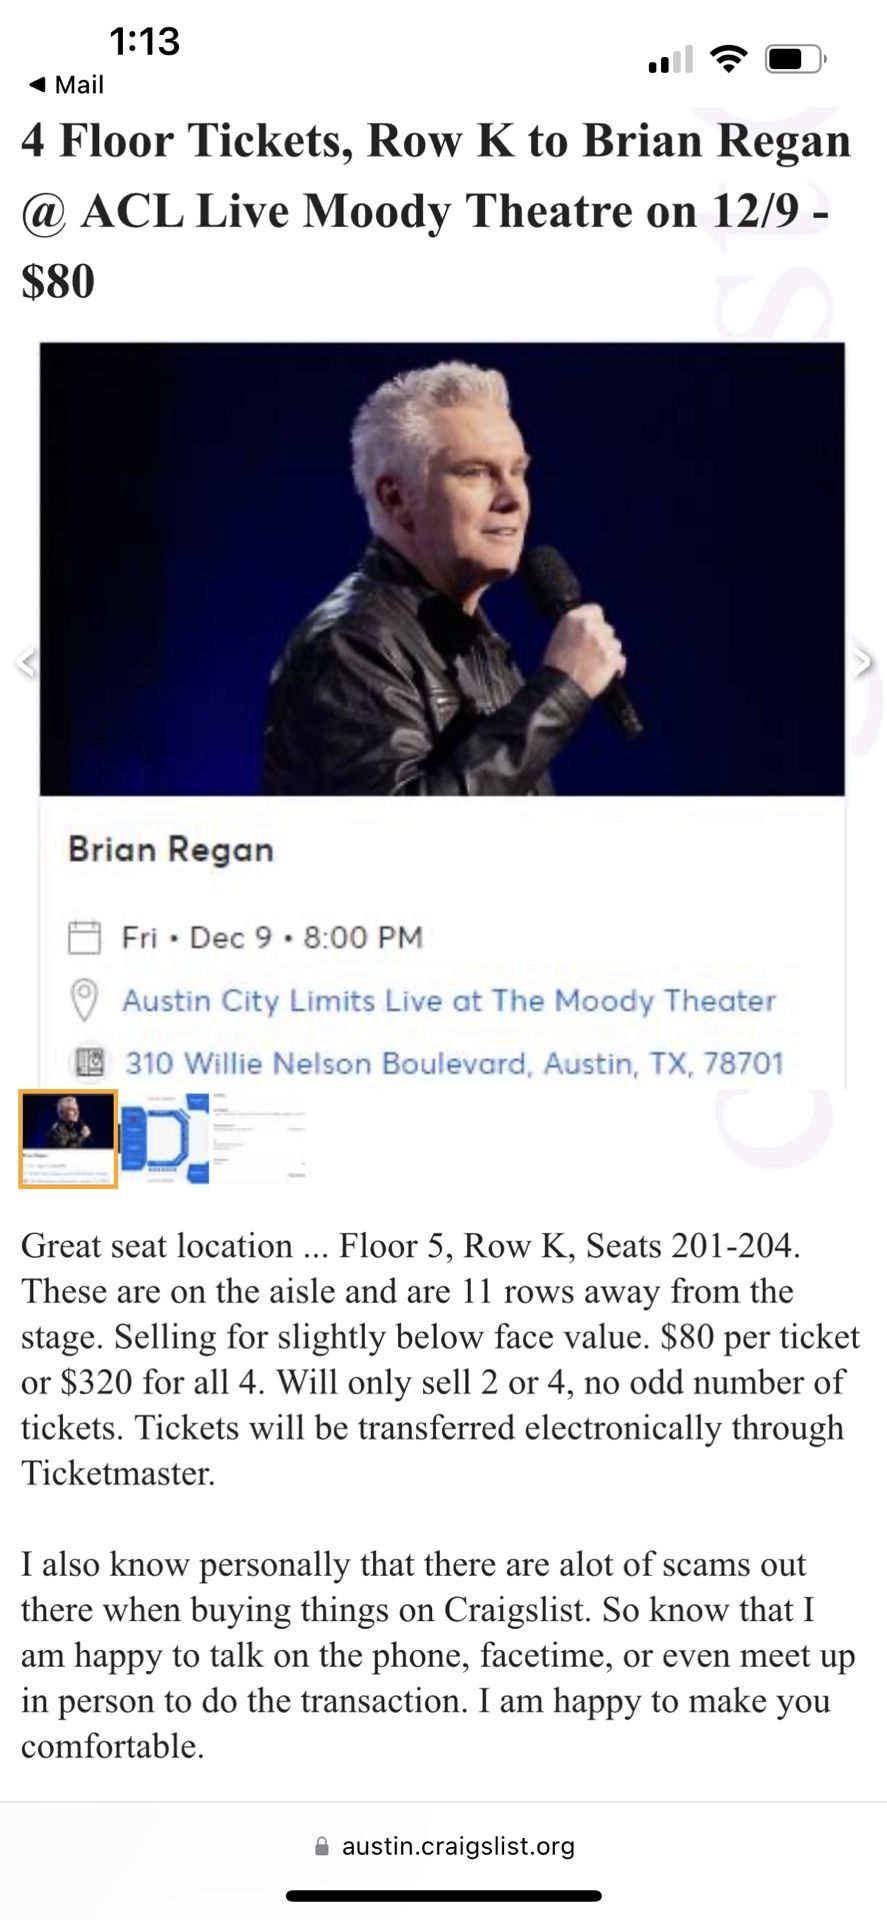 2 Floor Tickets, Row K to Brian Regan @ ACL Live Moody Theatre on 12/9